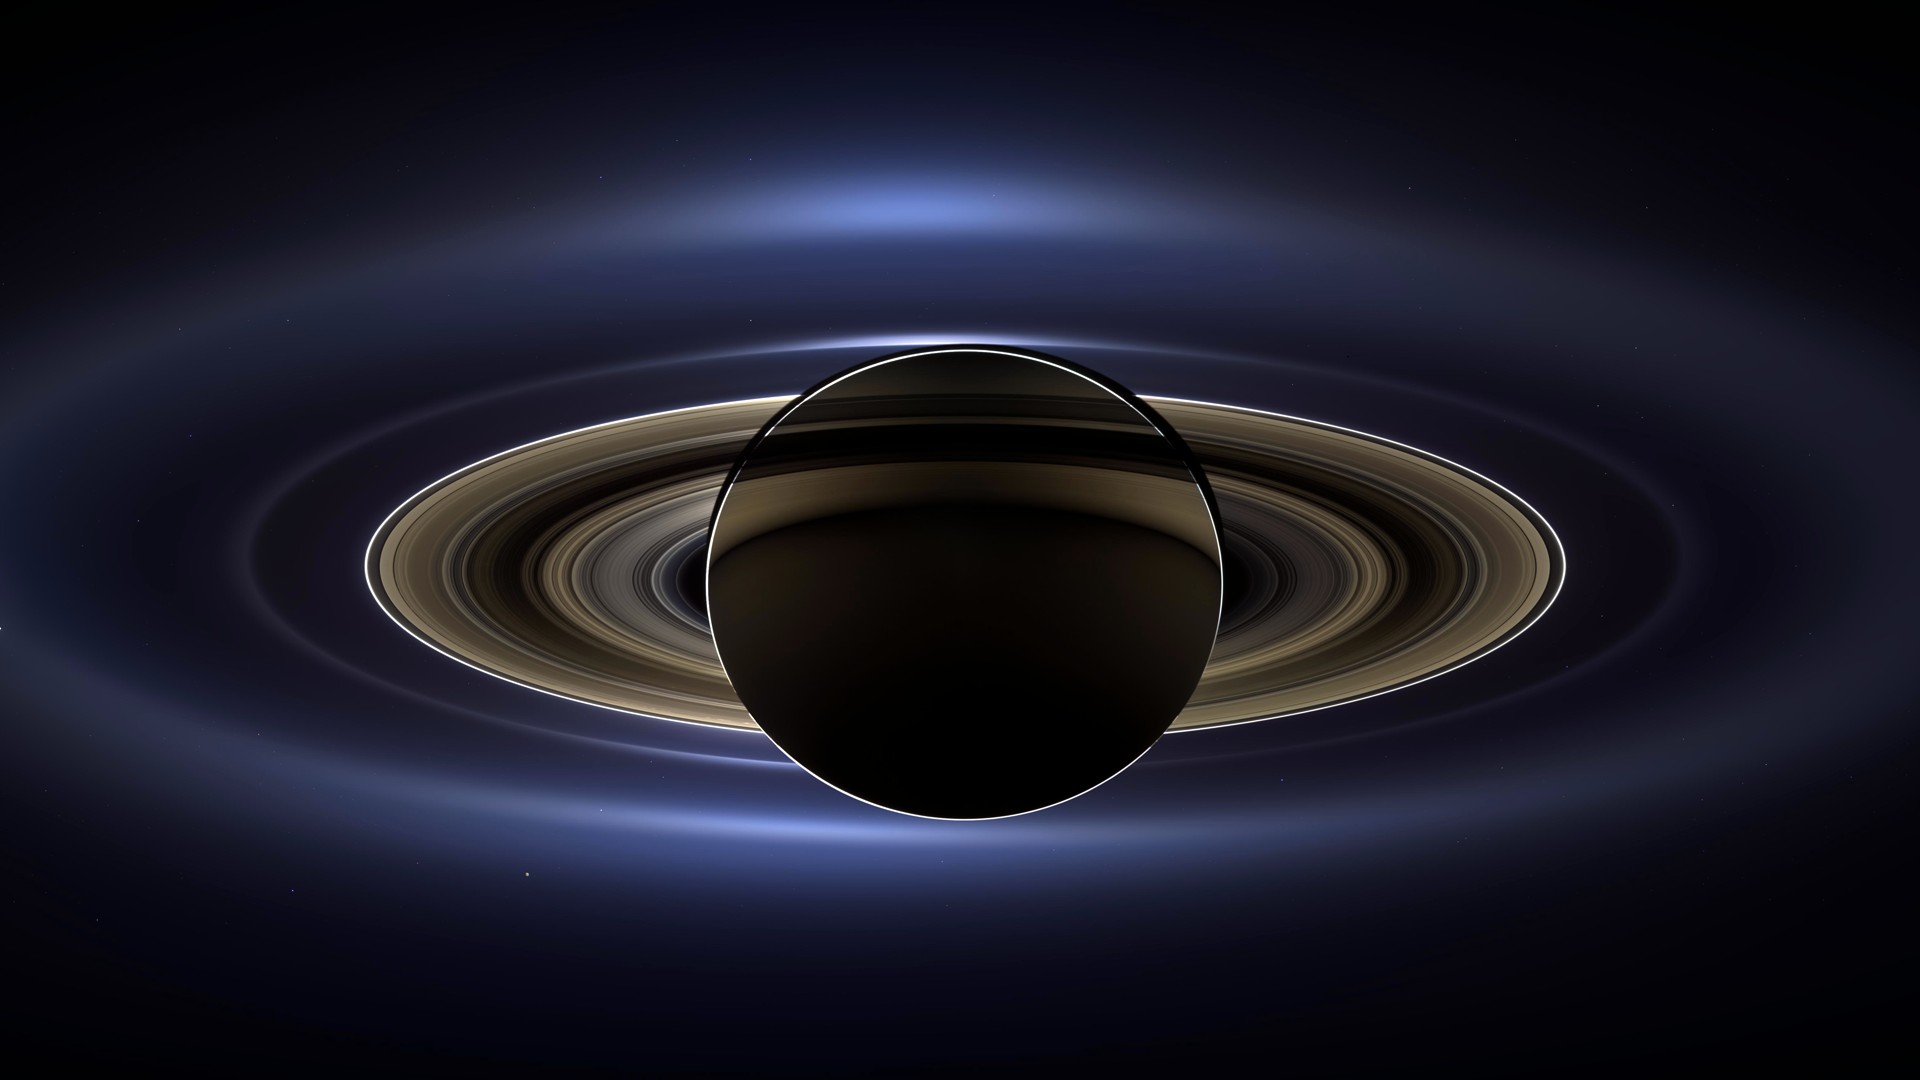 Saturn, PIA17172, Space, Planet, Planetary rings, NASA, Science, Stars, Solar System Wallpaper